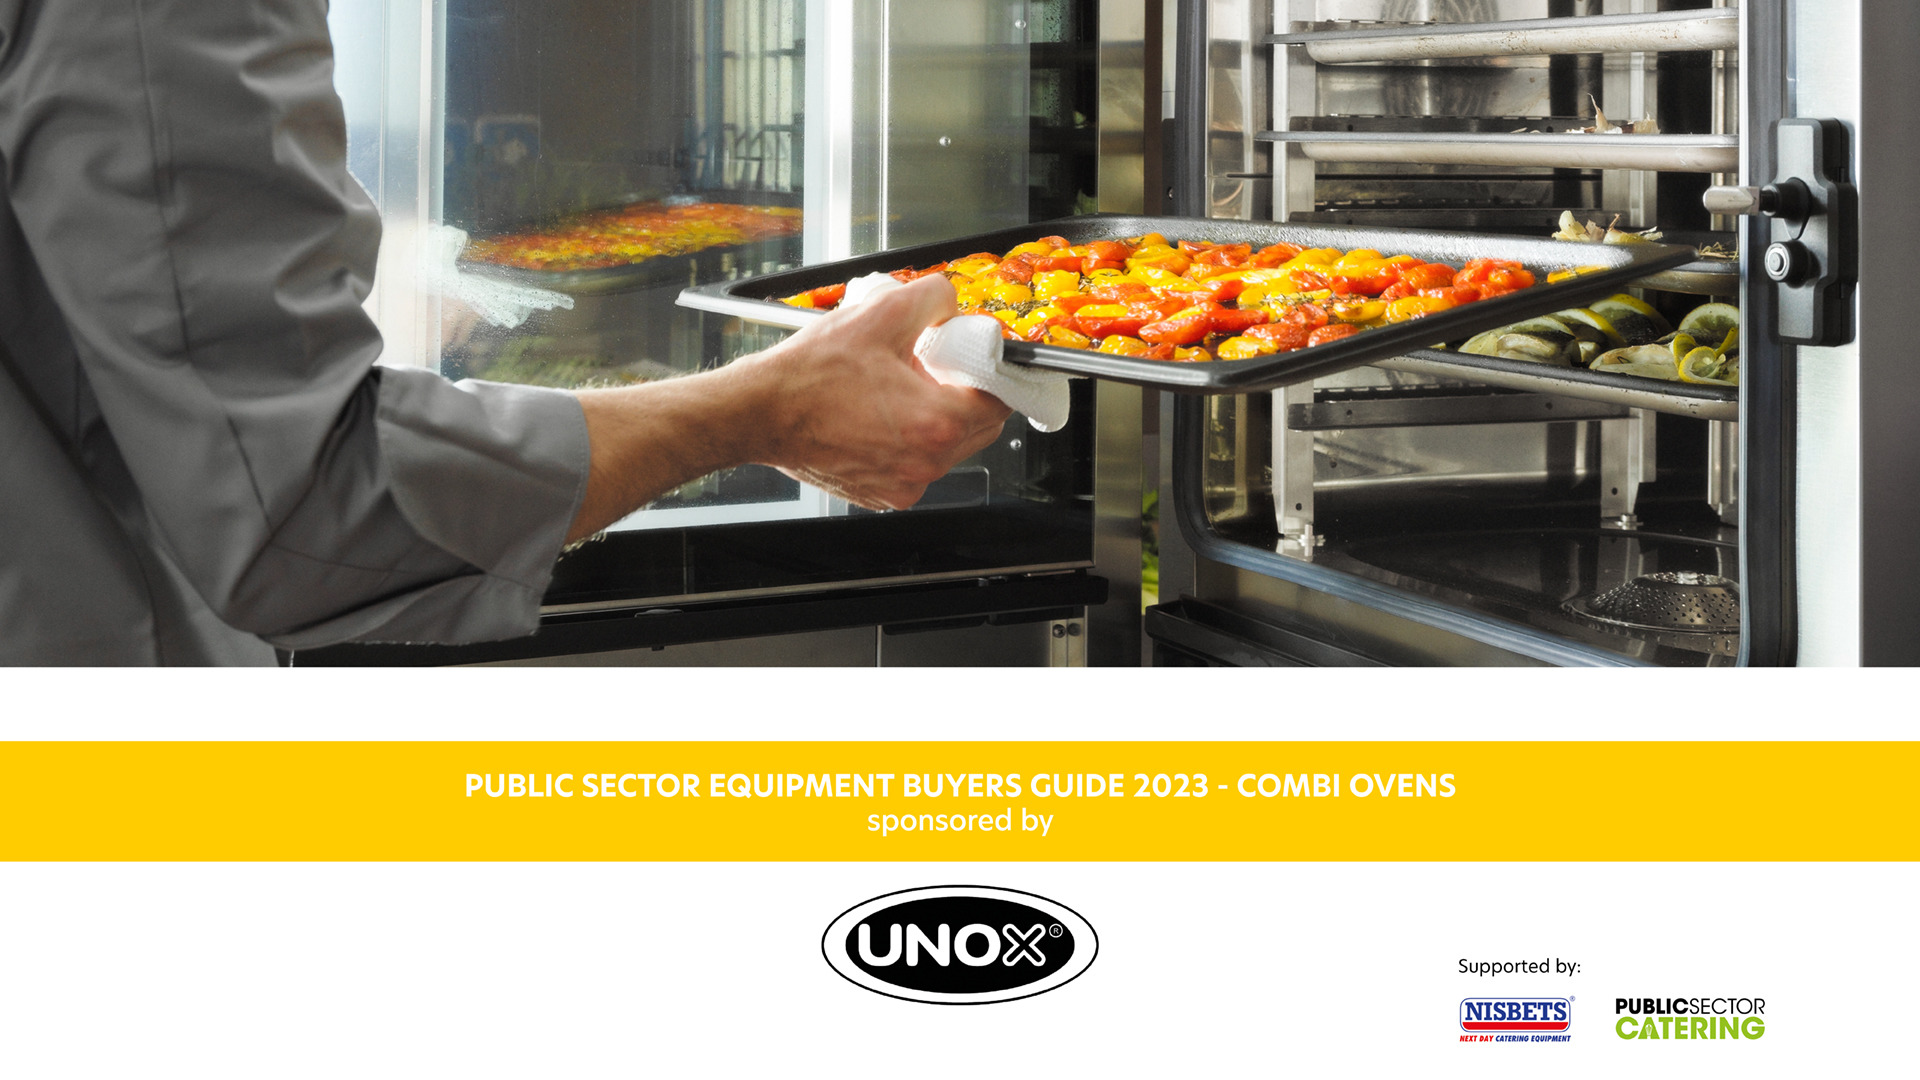 FEA Public Sector Equipment Buyers Guide 2023 - Combi Ovens